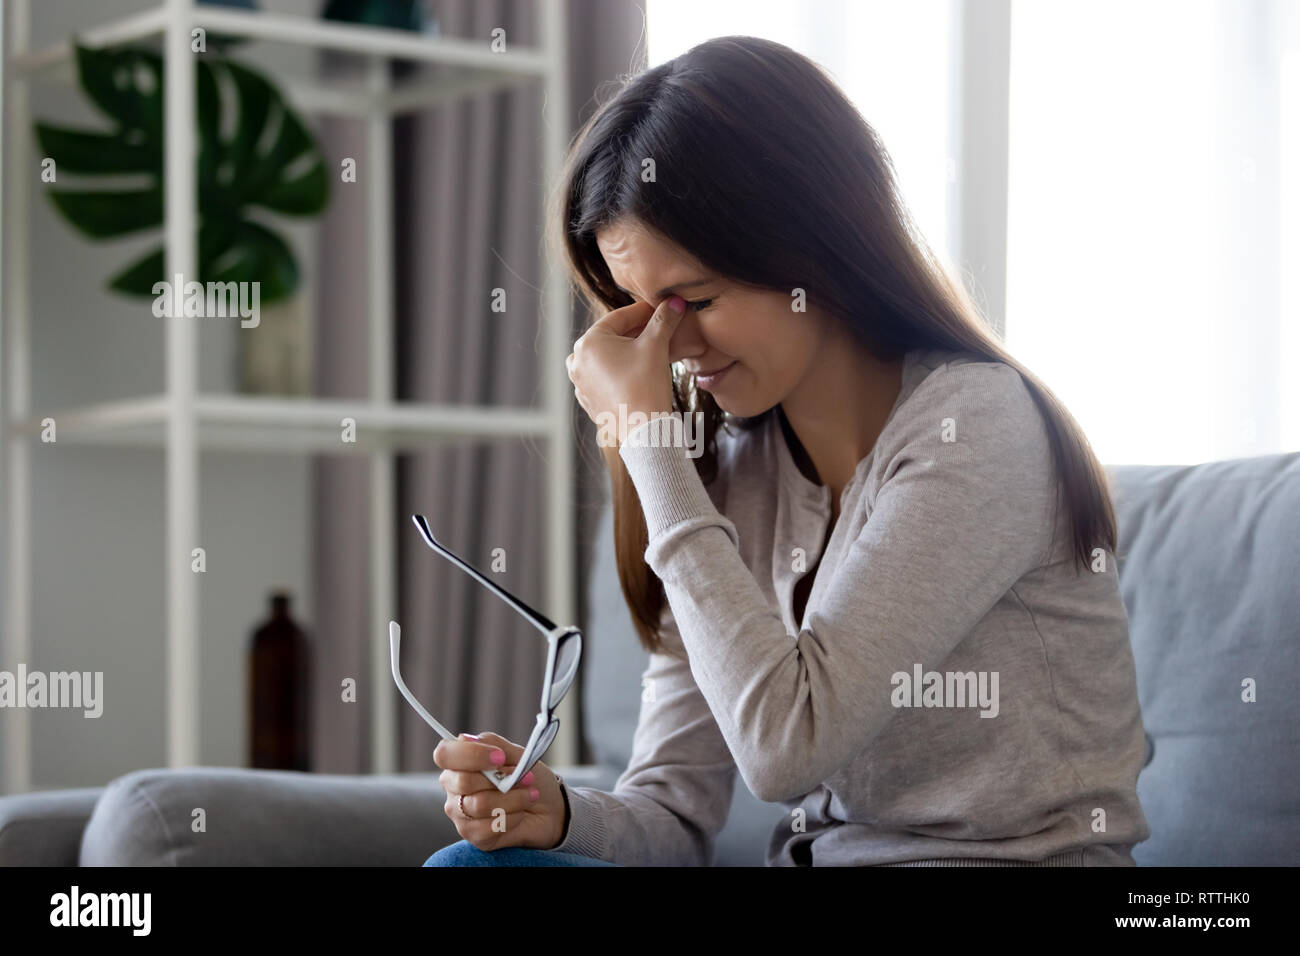 Upset woman taking off glasses, suffering from eye strain Stock Photo